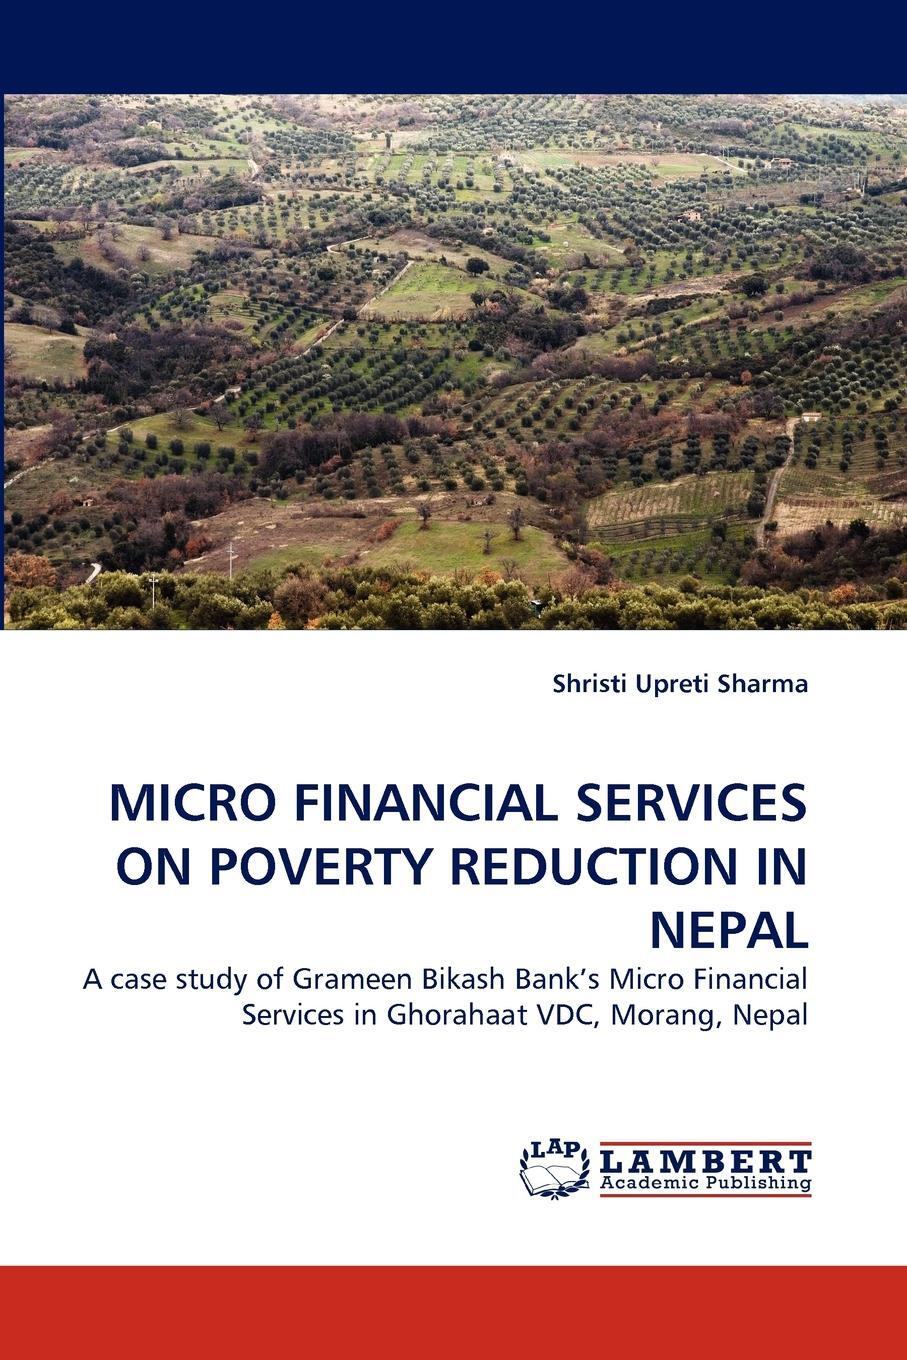 фото MICRO FINANCIAL SERVICES ON POVERTY REDUCTION IN NEPAL